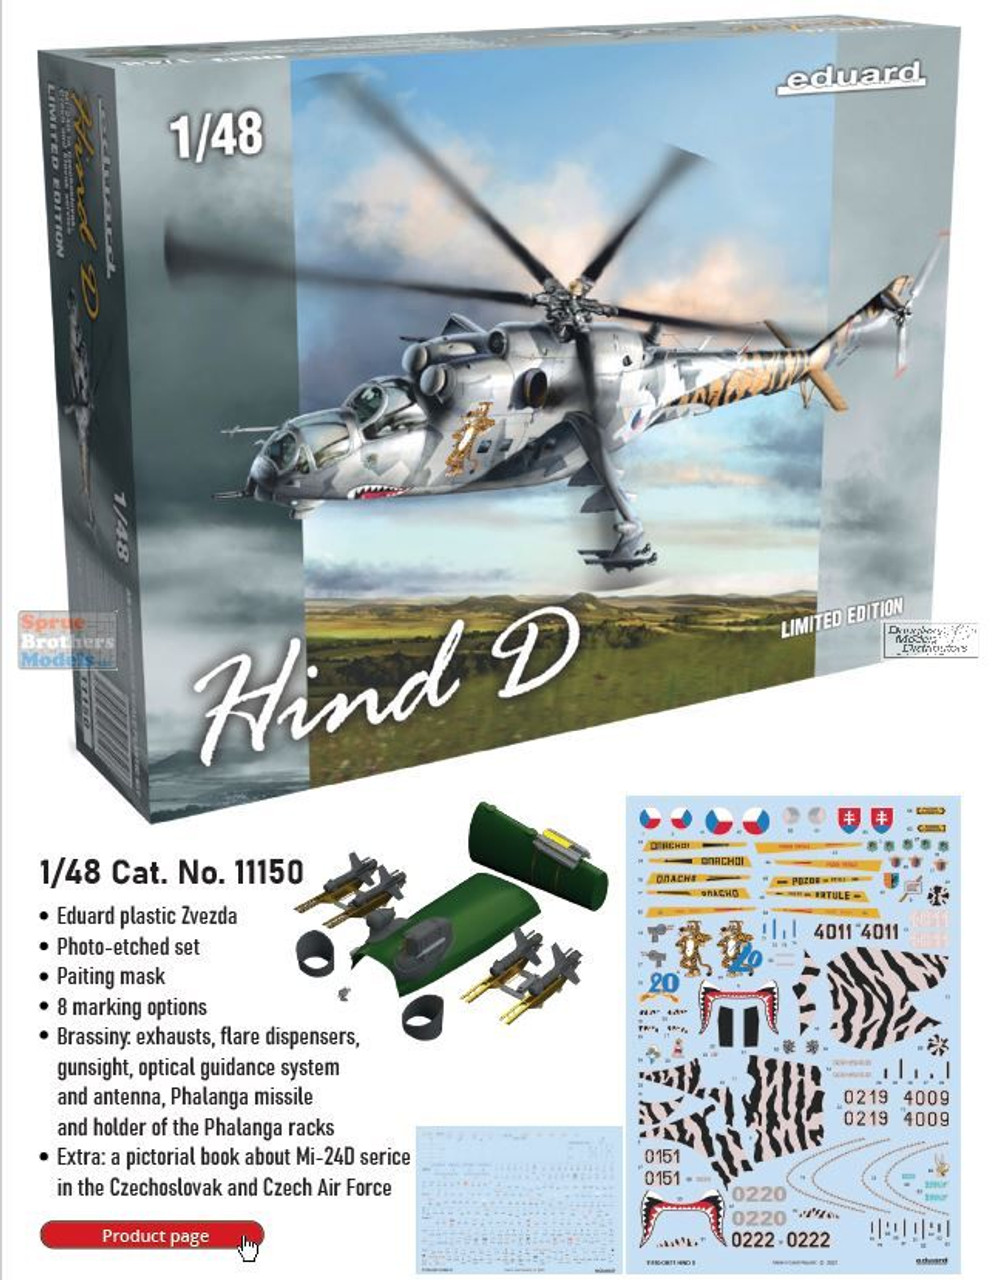 Revell Model Still Factory Mil-24d Hind Helicopter 1 48 for sale online